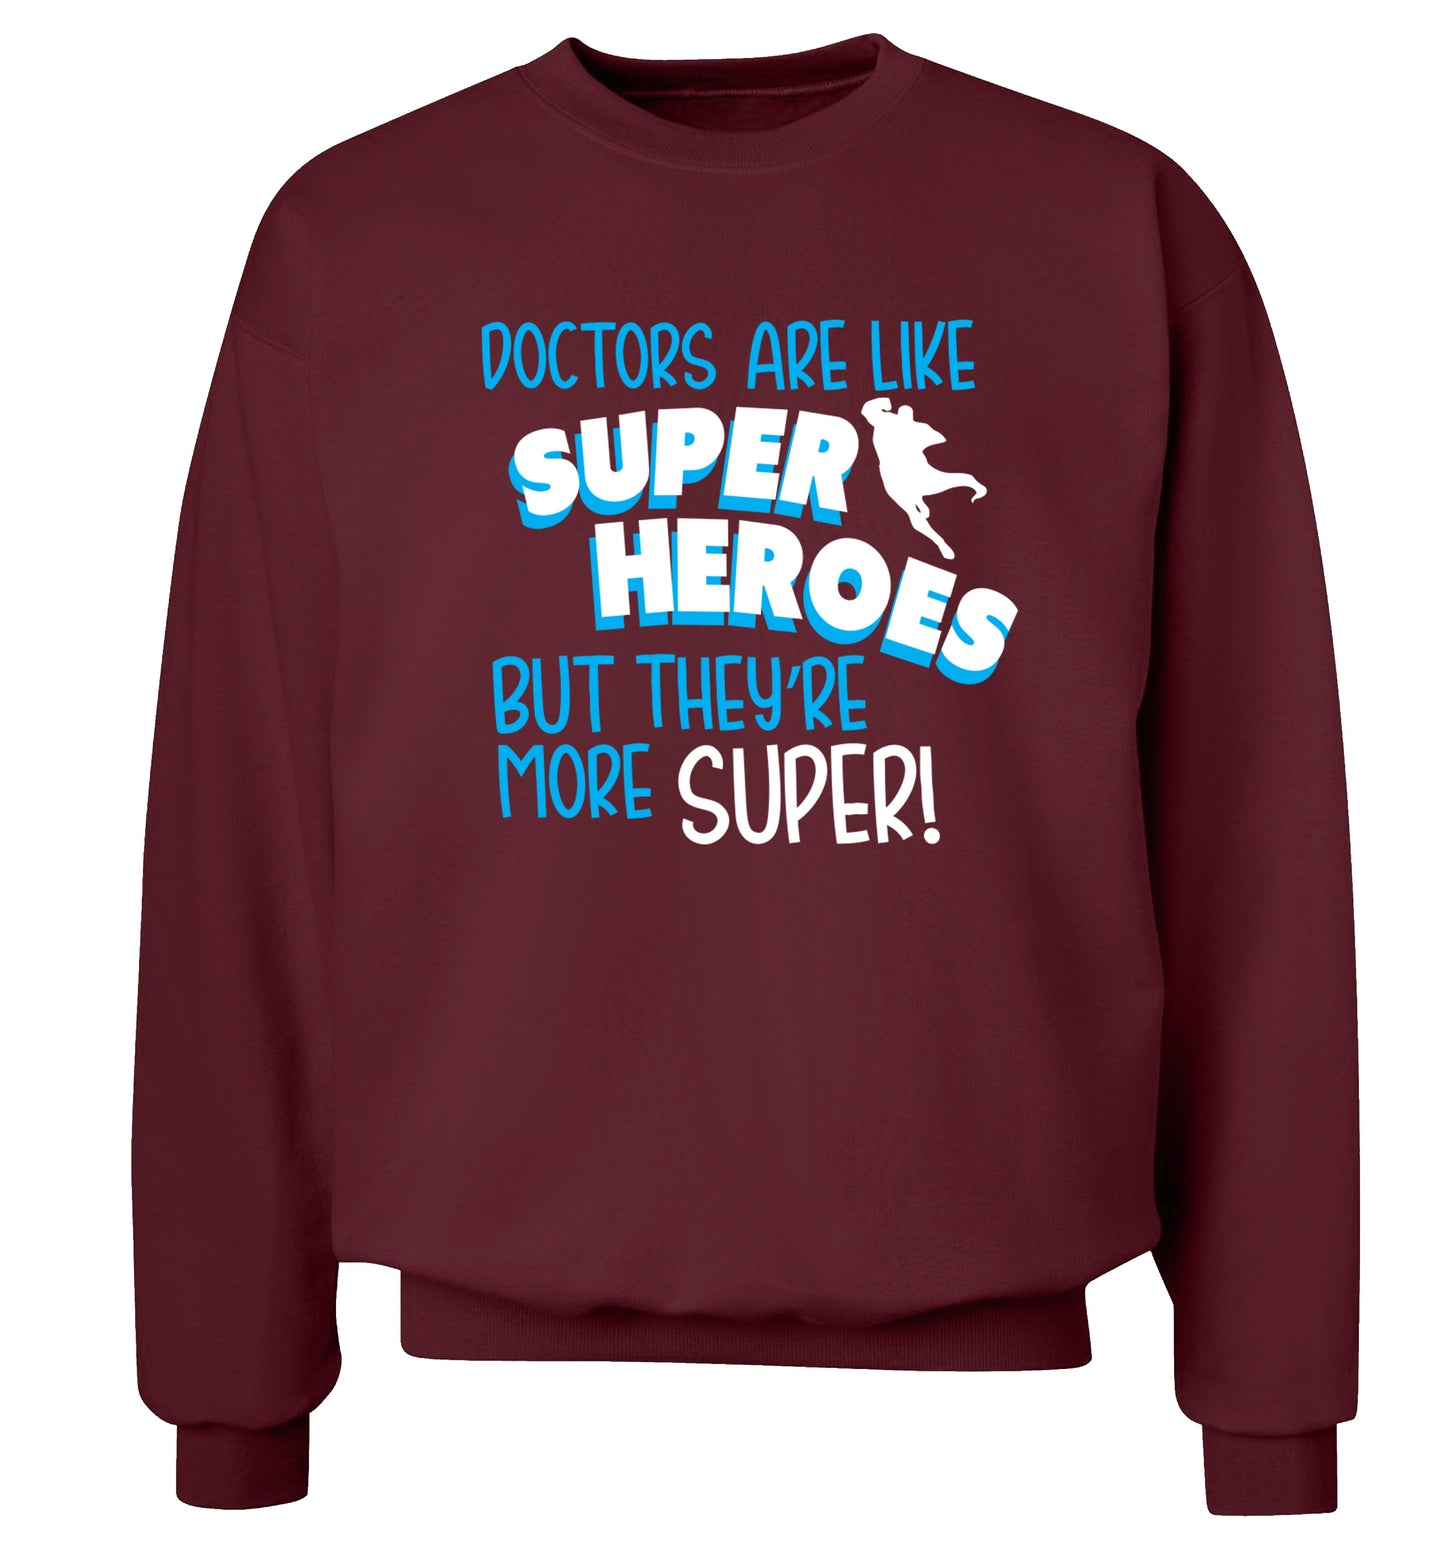 Doctors are like superheros but they're more super Adult's unisex maroon Sweater 2XL